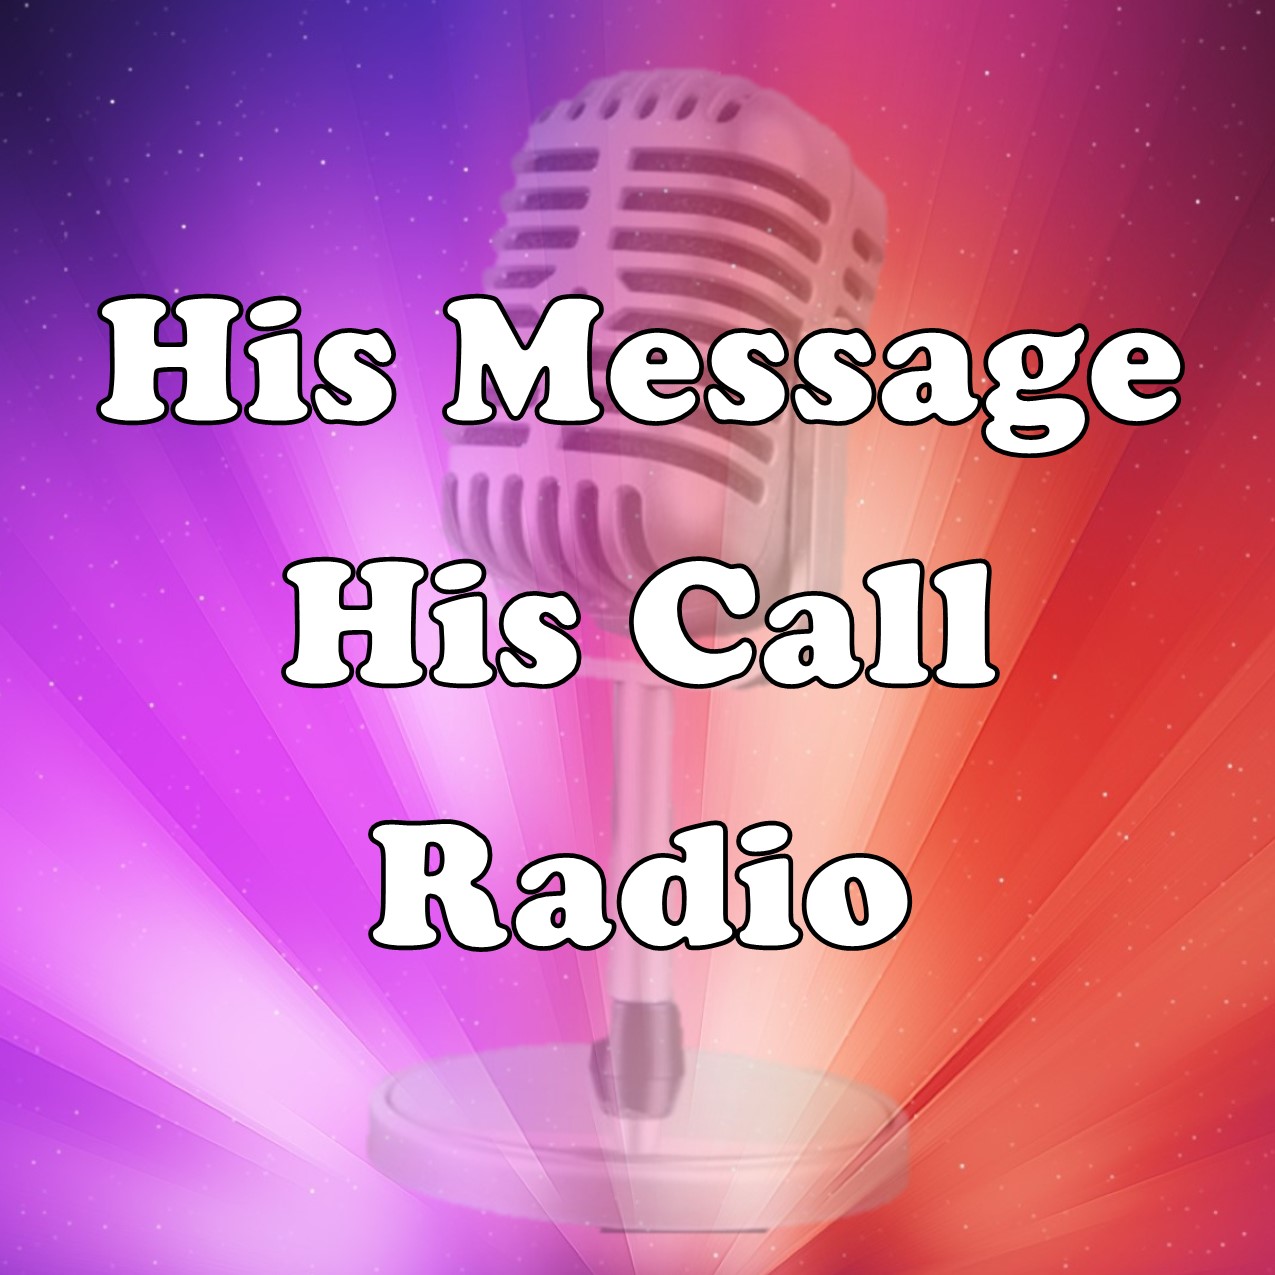 Art for Visit The His Message His Call Radio Website! by www.HisMessageHisCallRadio.com